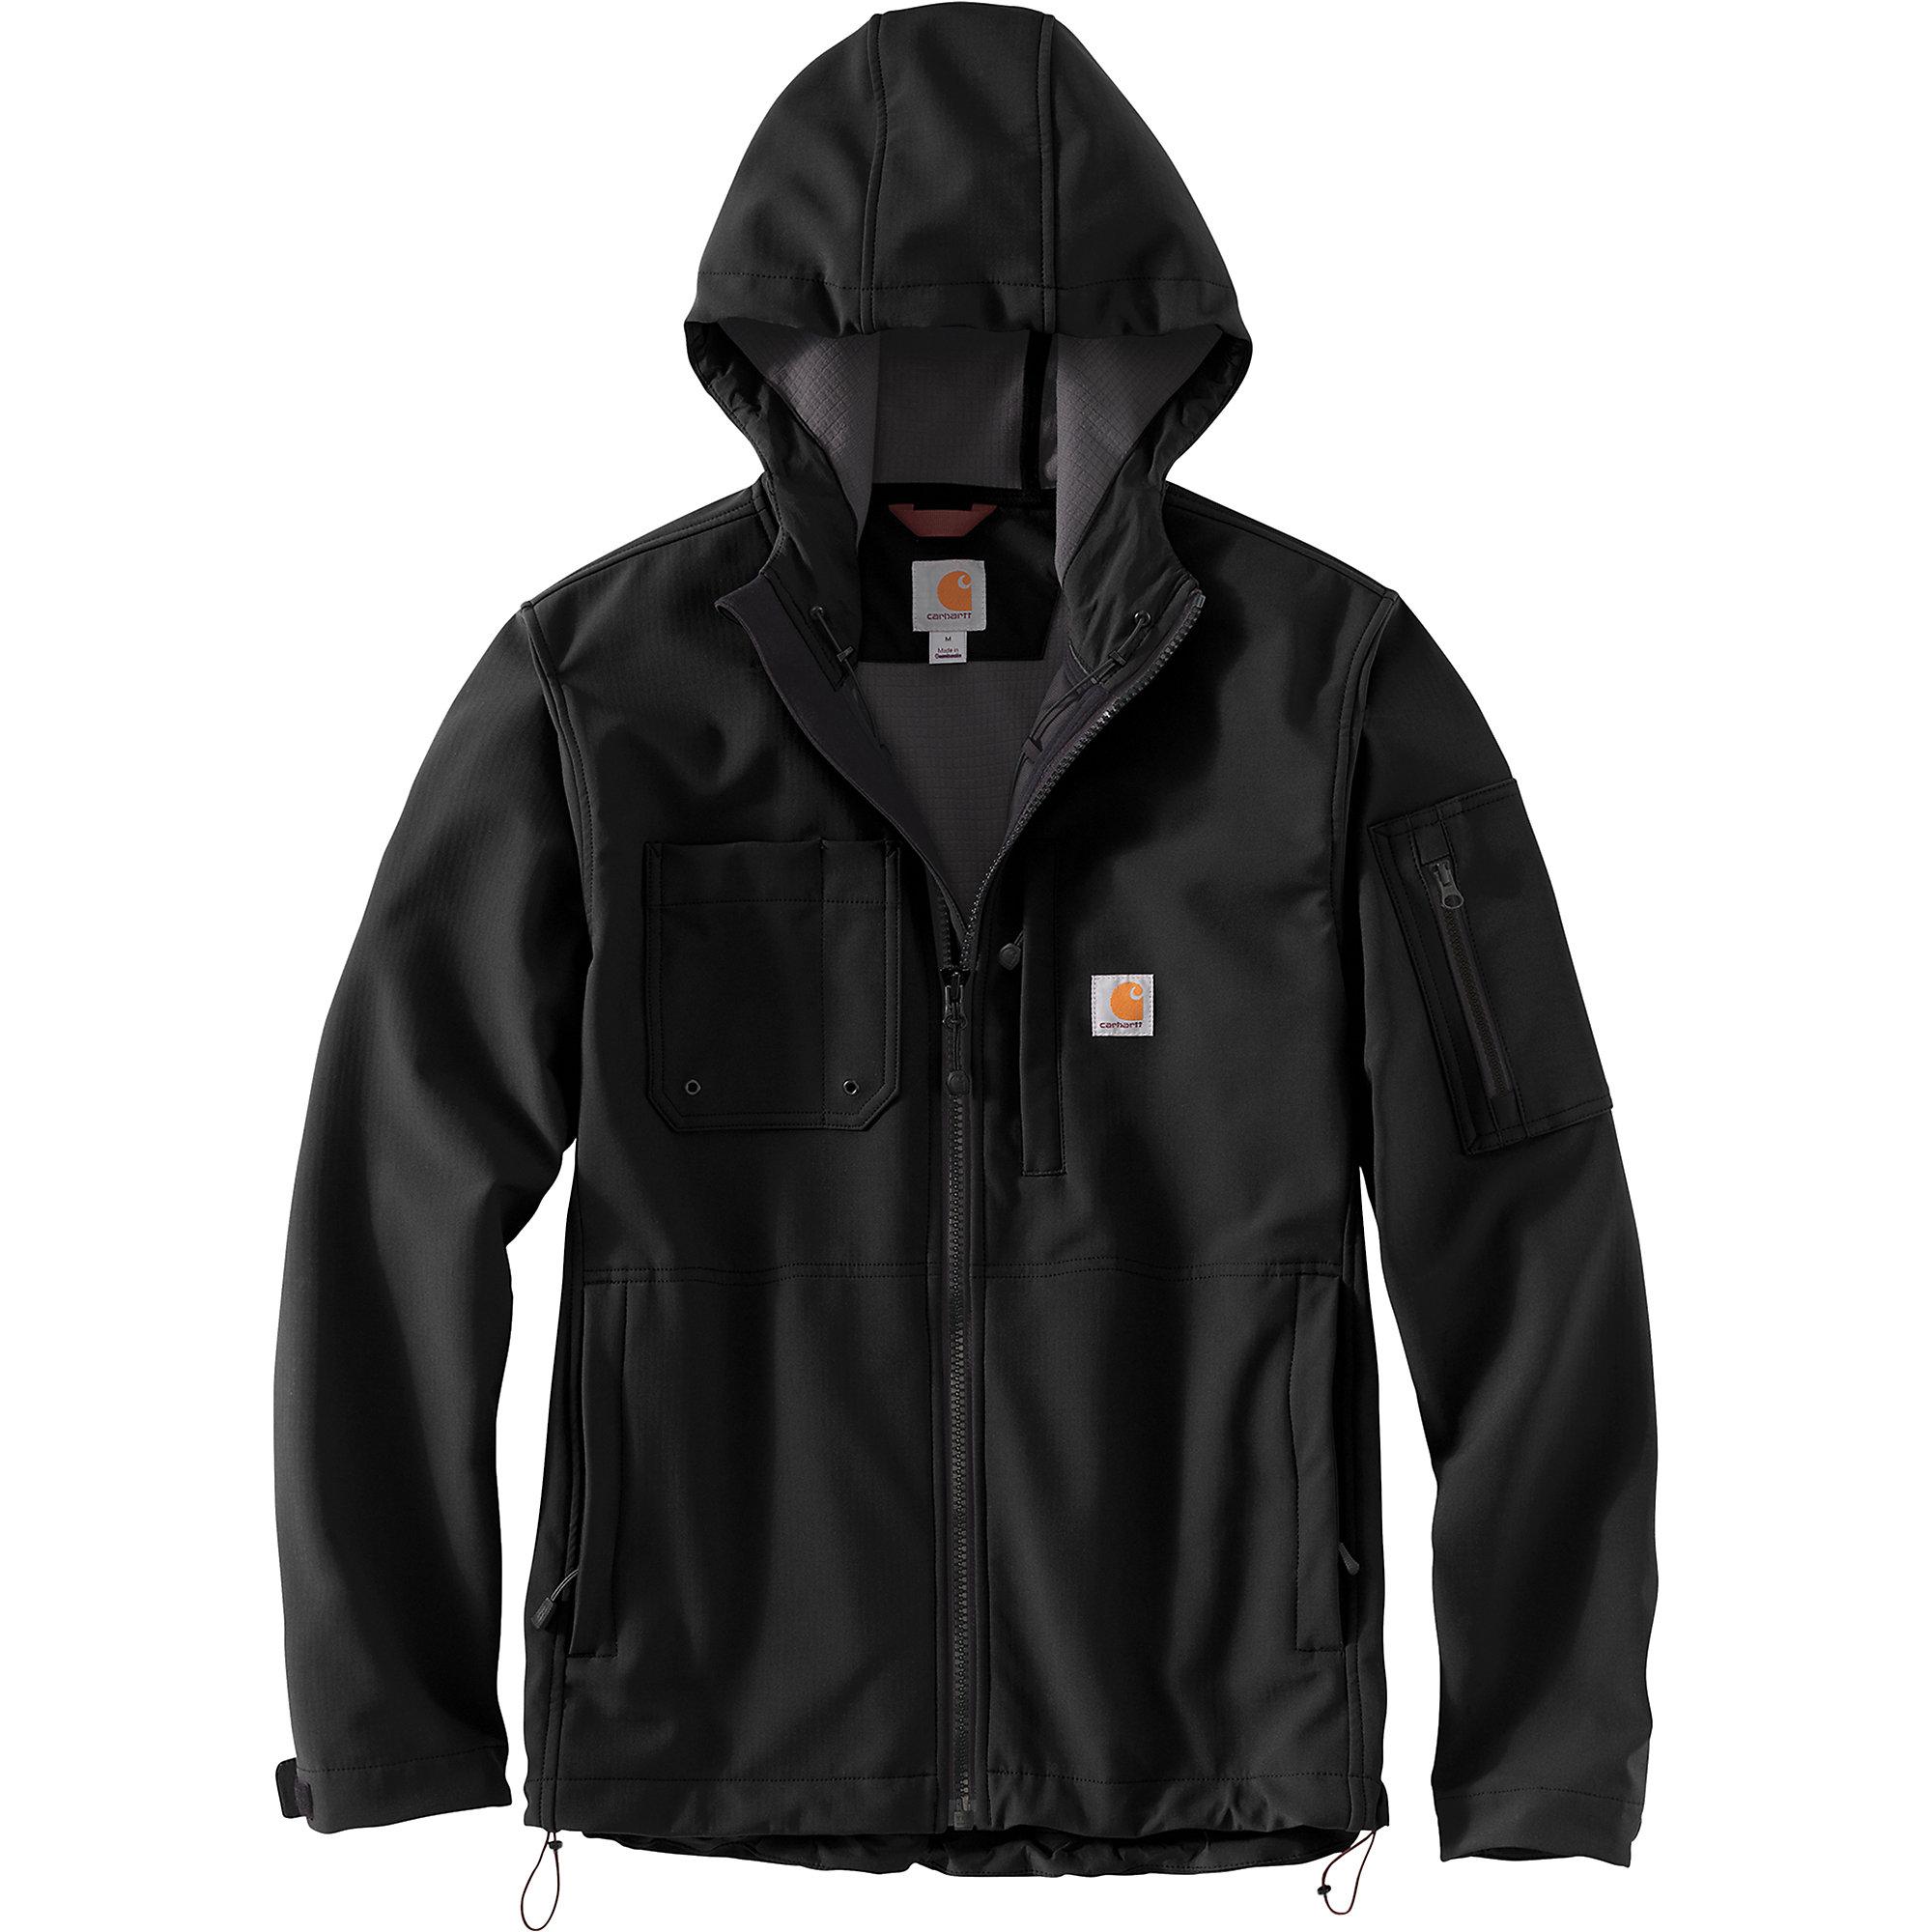 Carhartt Synthetic Rough Cut Hooded Jacket in Black for Men - Lyst